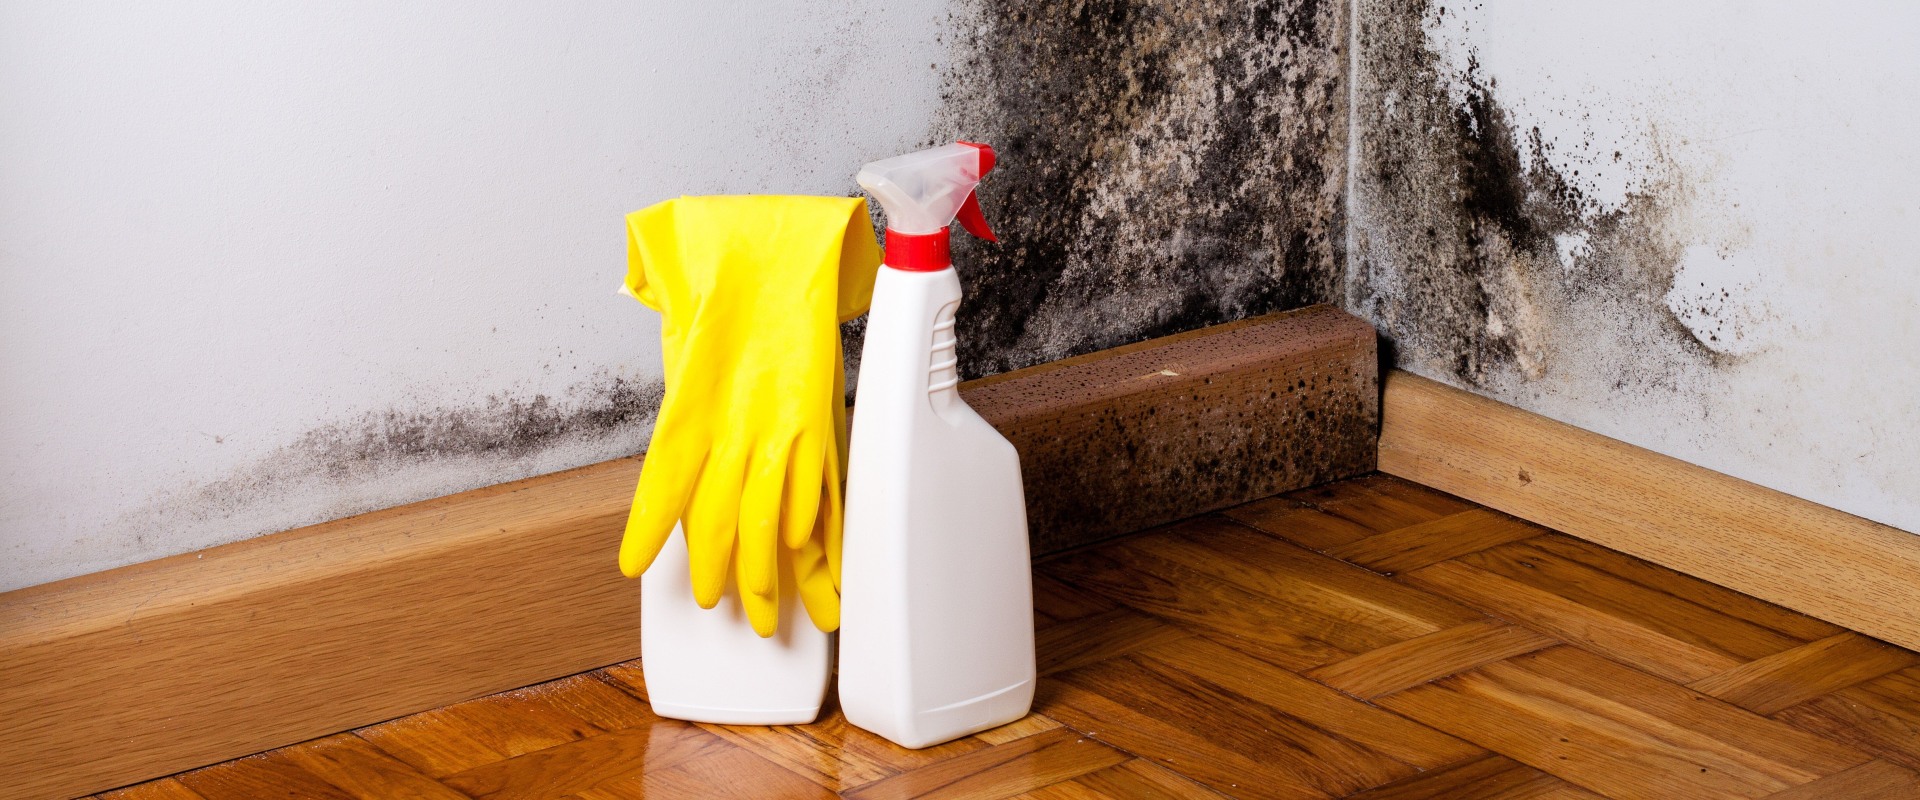 How to Get Rid of Black Mold Permanently